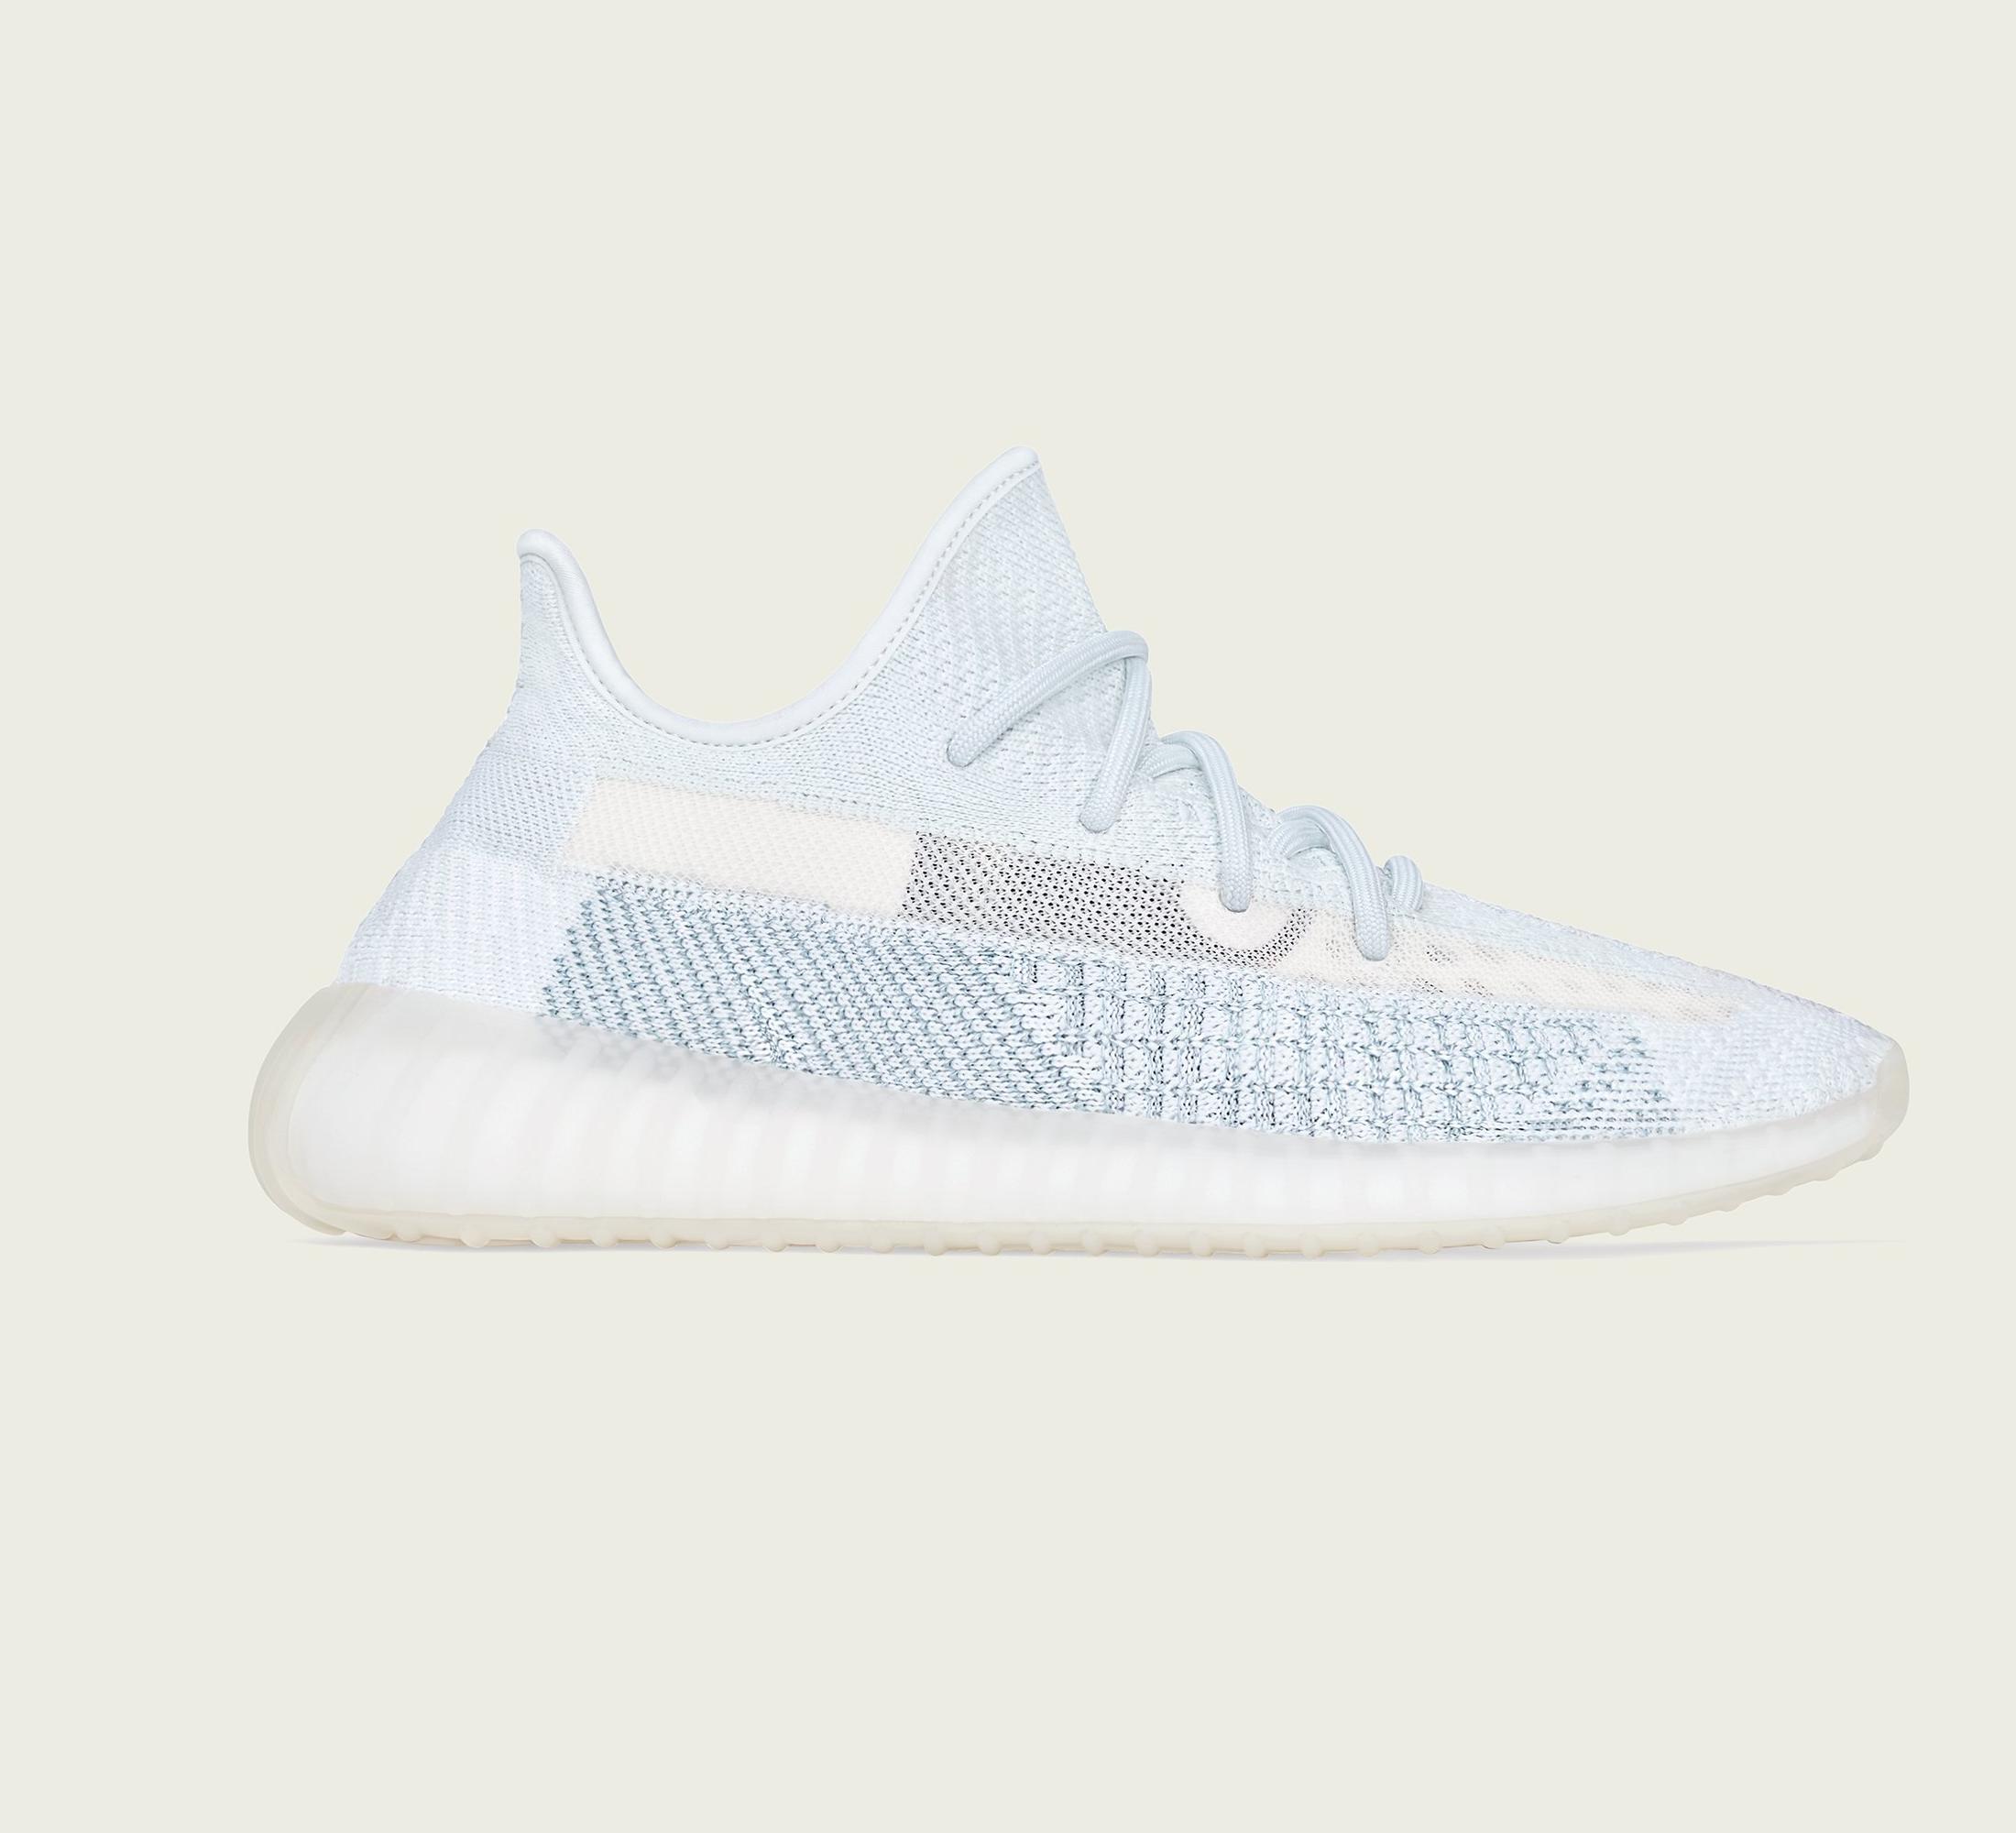 Sneakers Release : Adidas x Yeezy 350 V2 “Cloud”